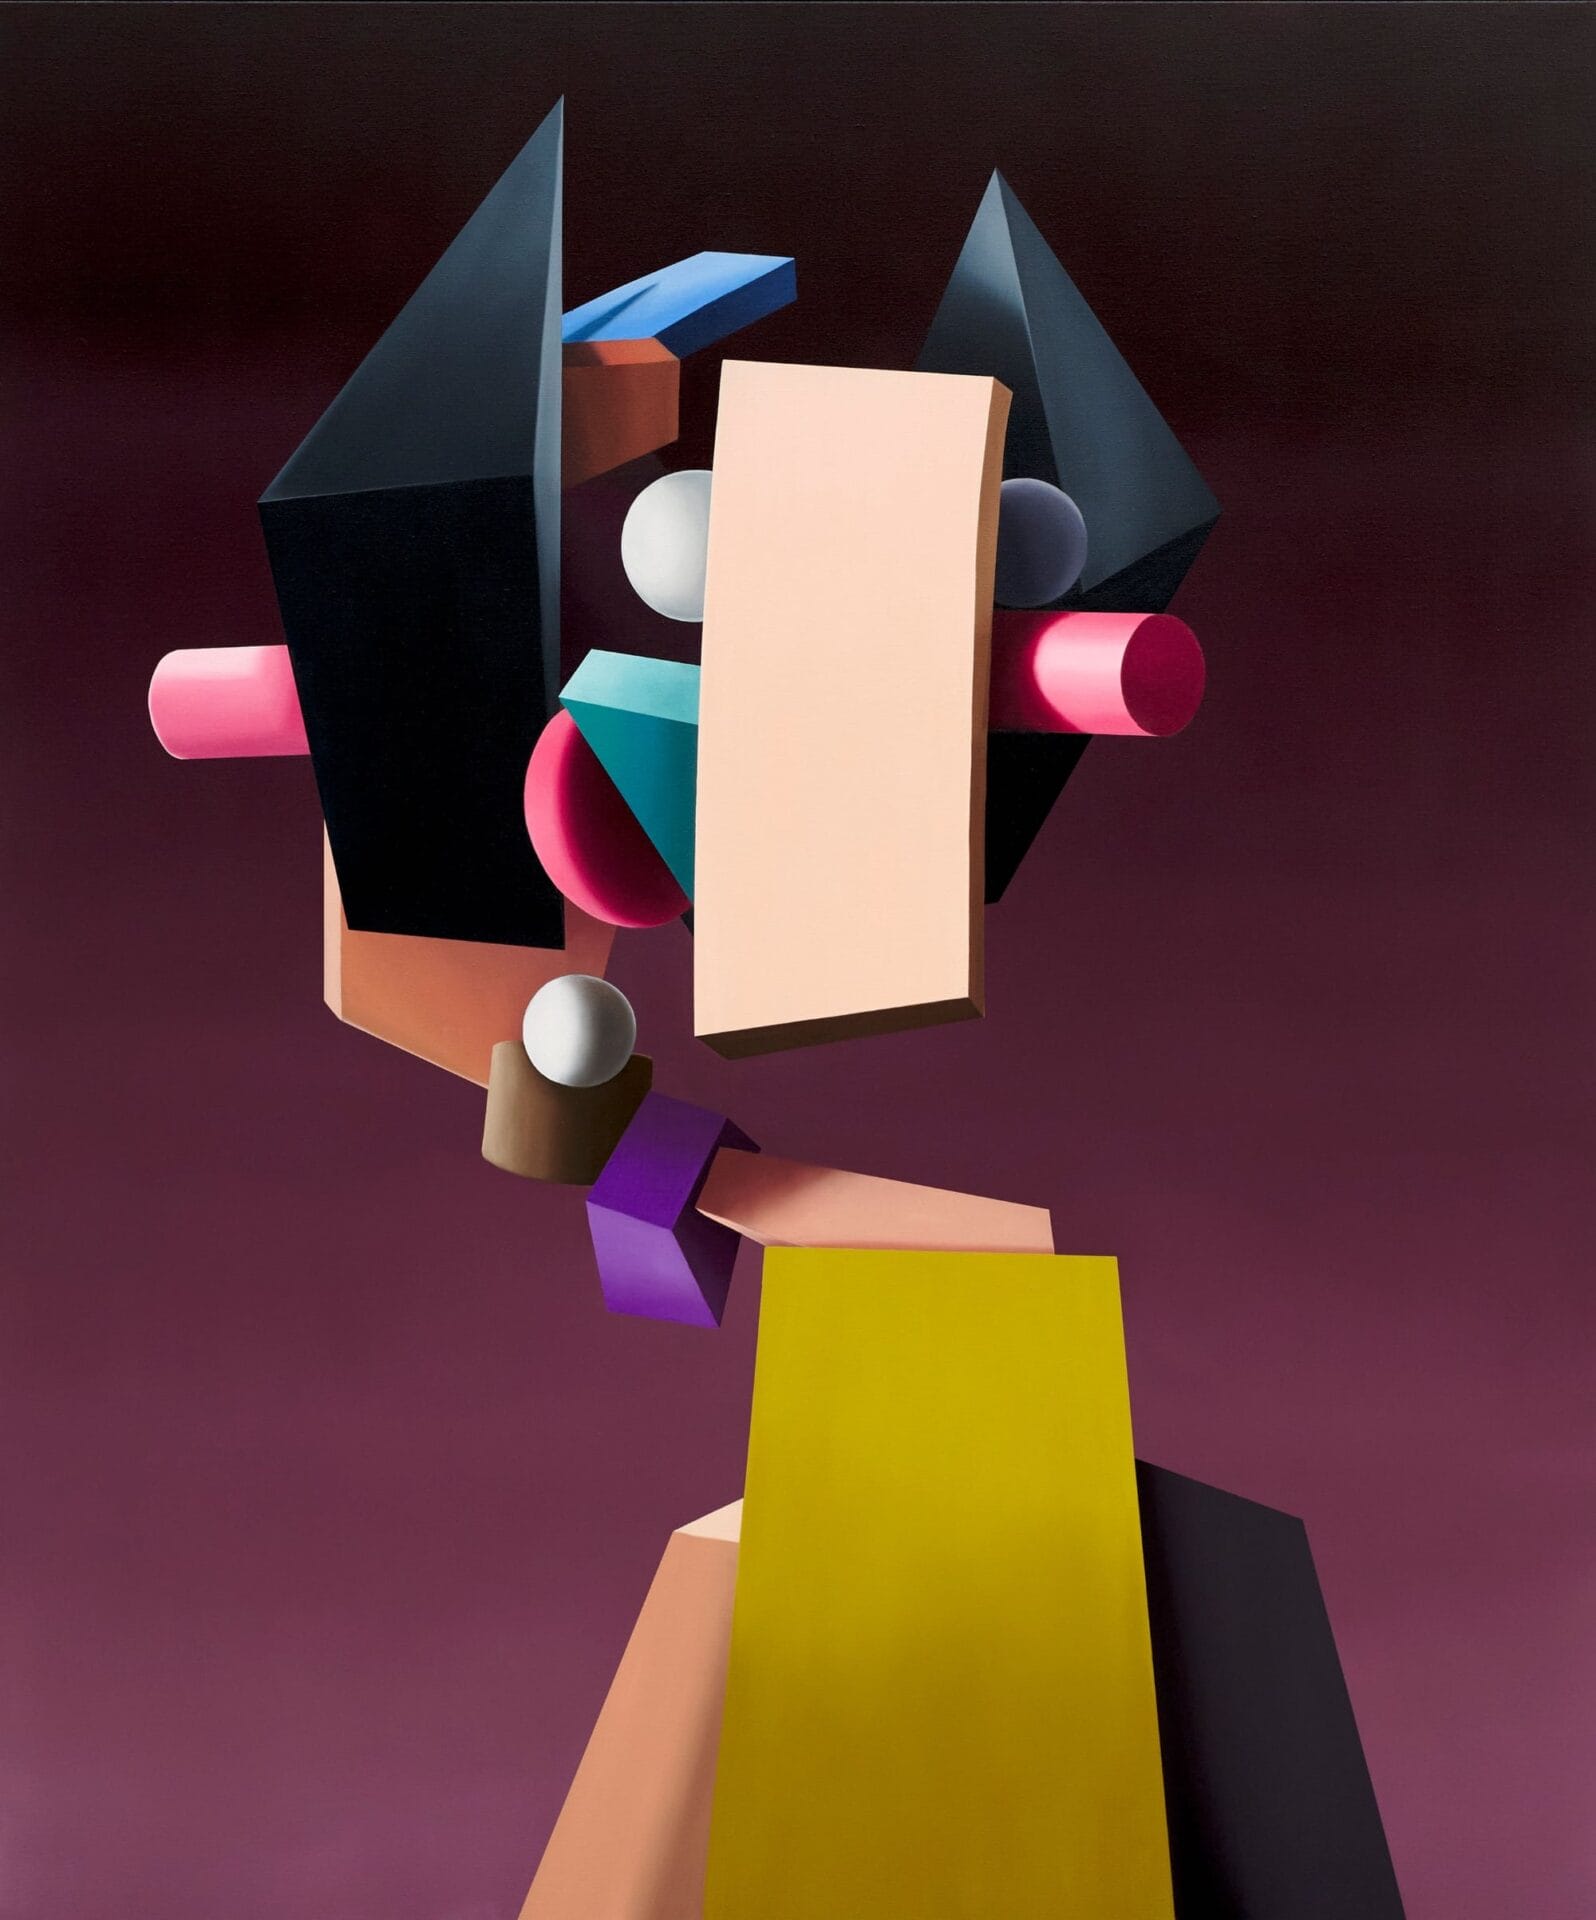 an abstract portrait of a figure painted chunky, colorful shapes including pink cylinder ears